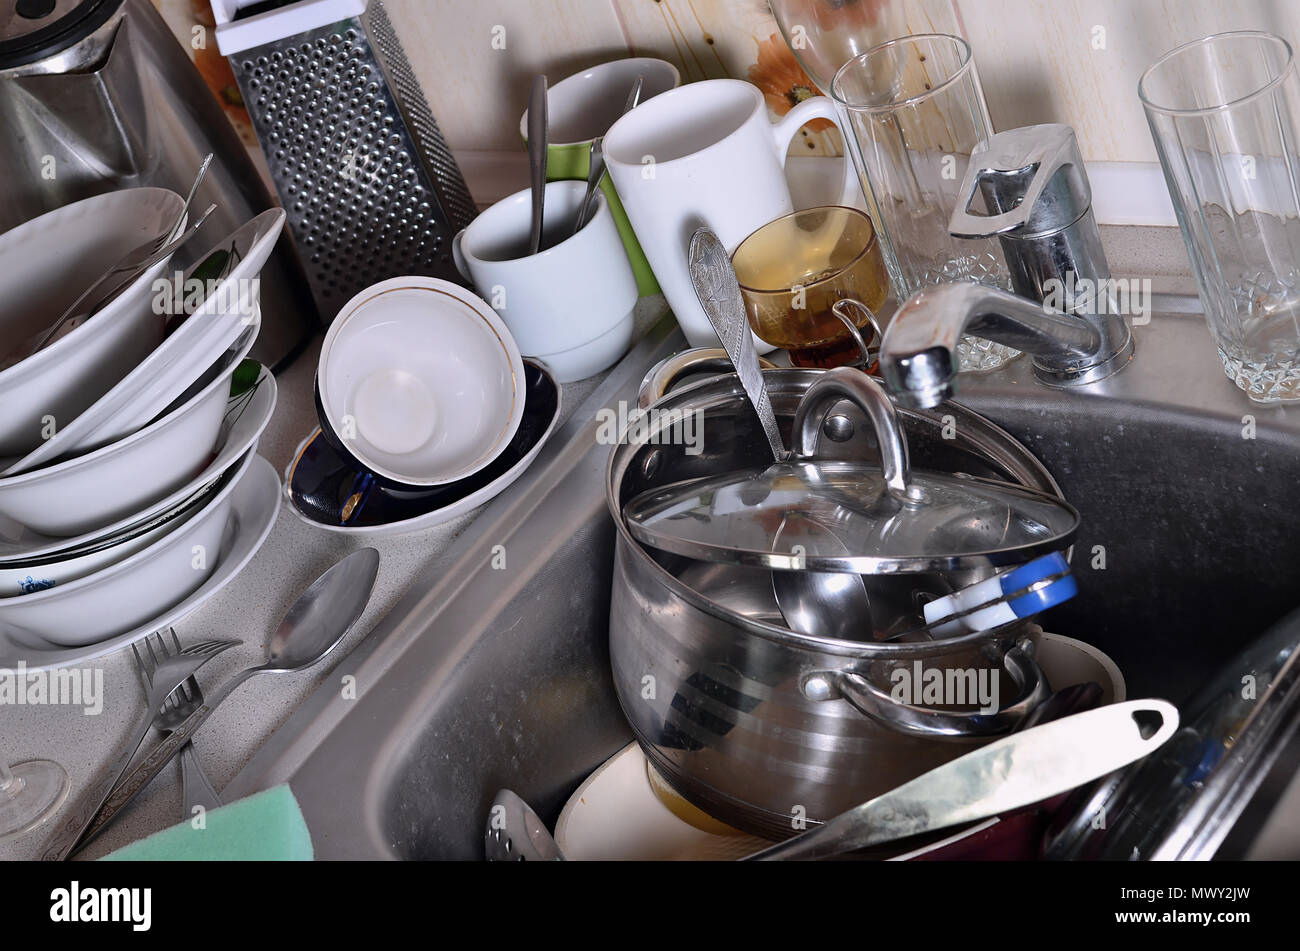 A huge pile of unwashed dishes in the kitchen sink and on the ...